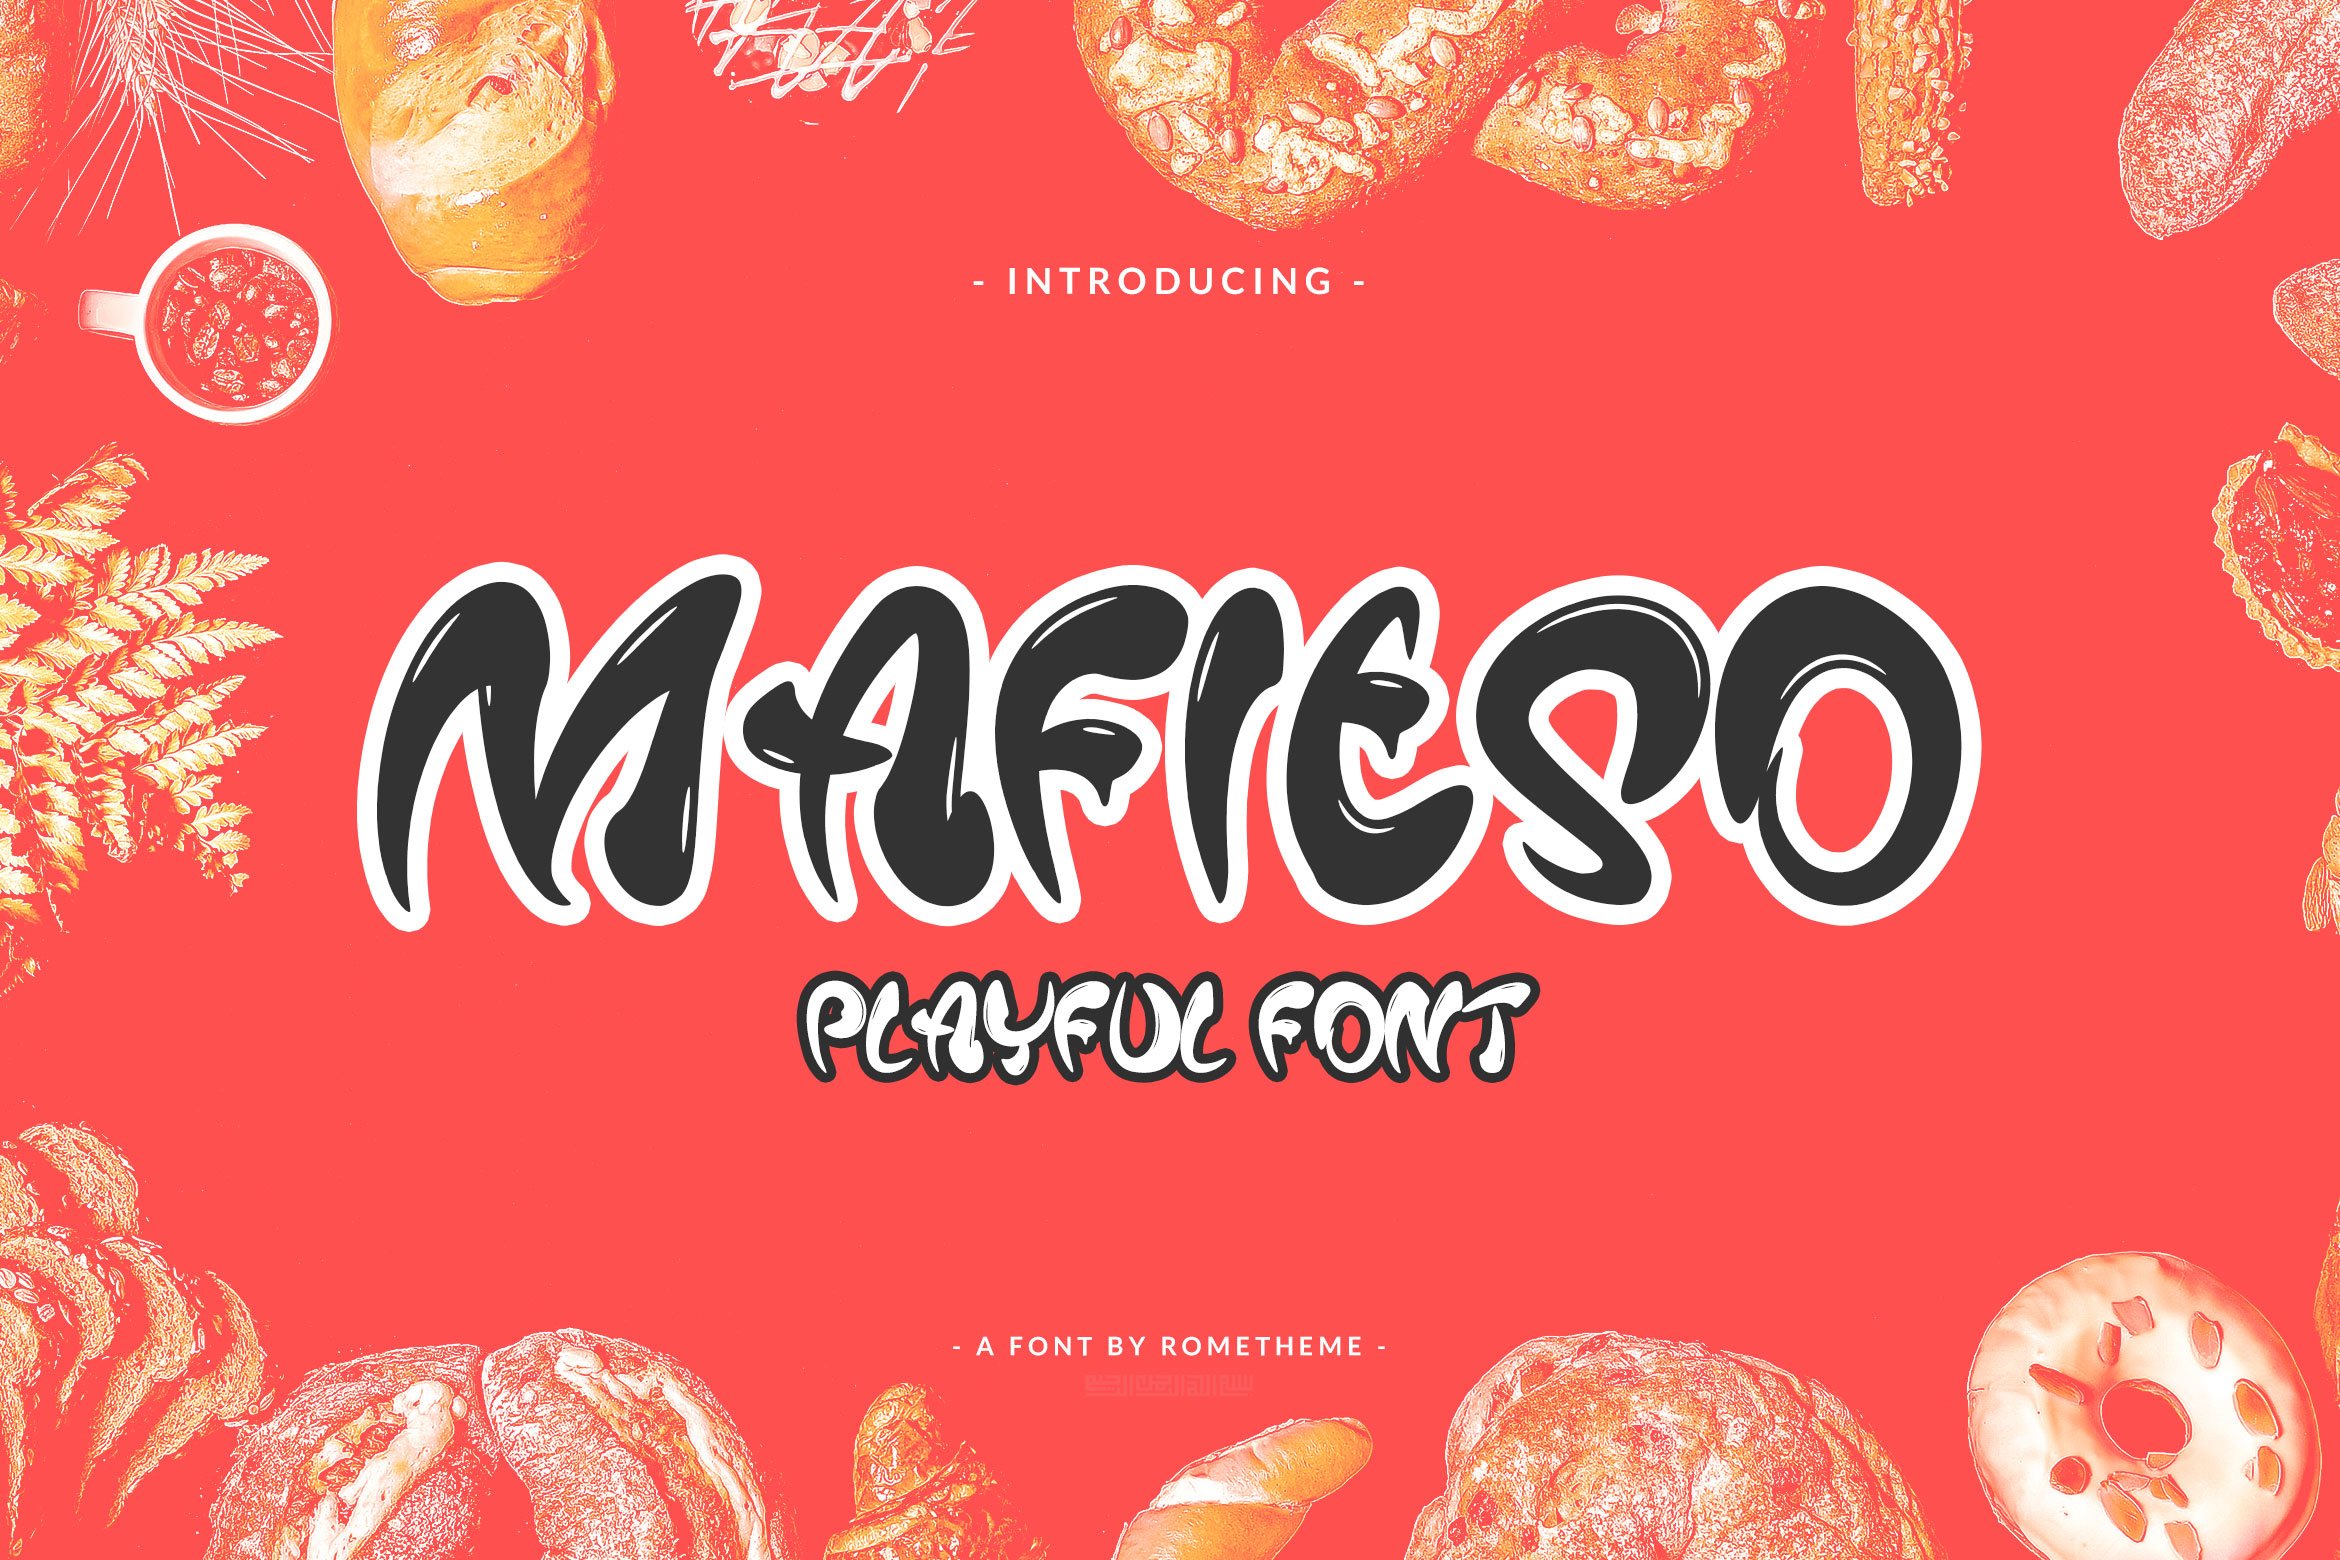 Mafieso - Playful Font cover image.